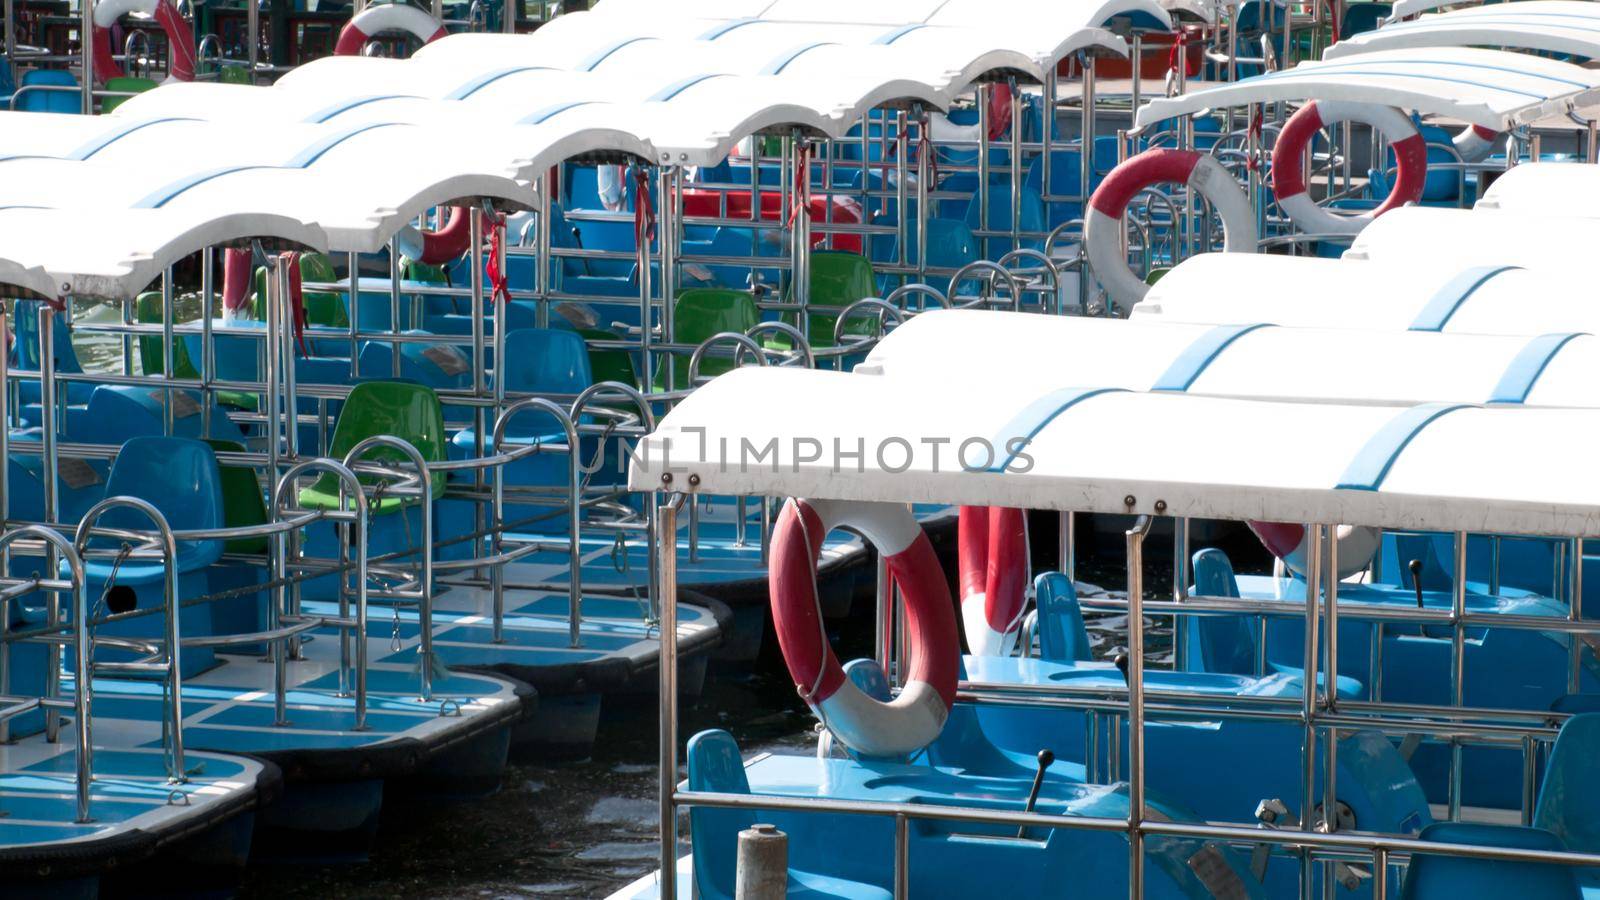 Catamarans in Summer Palace in Beijing, China